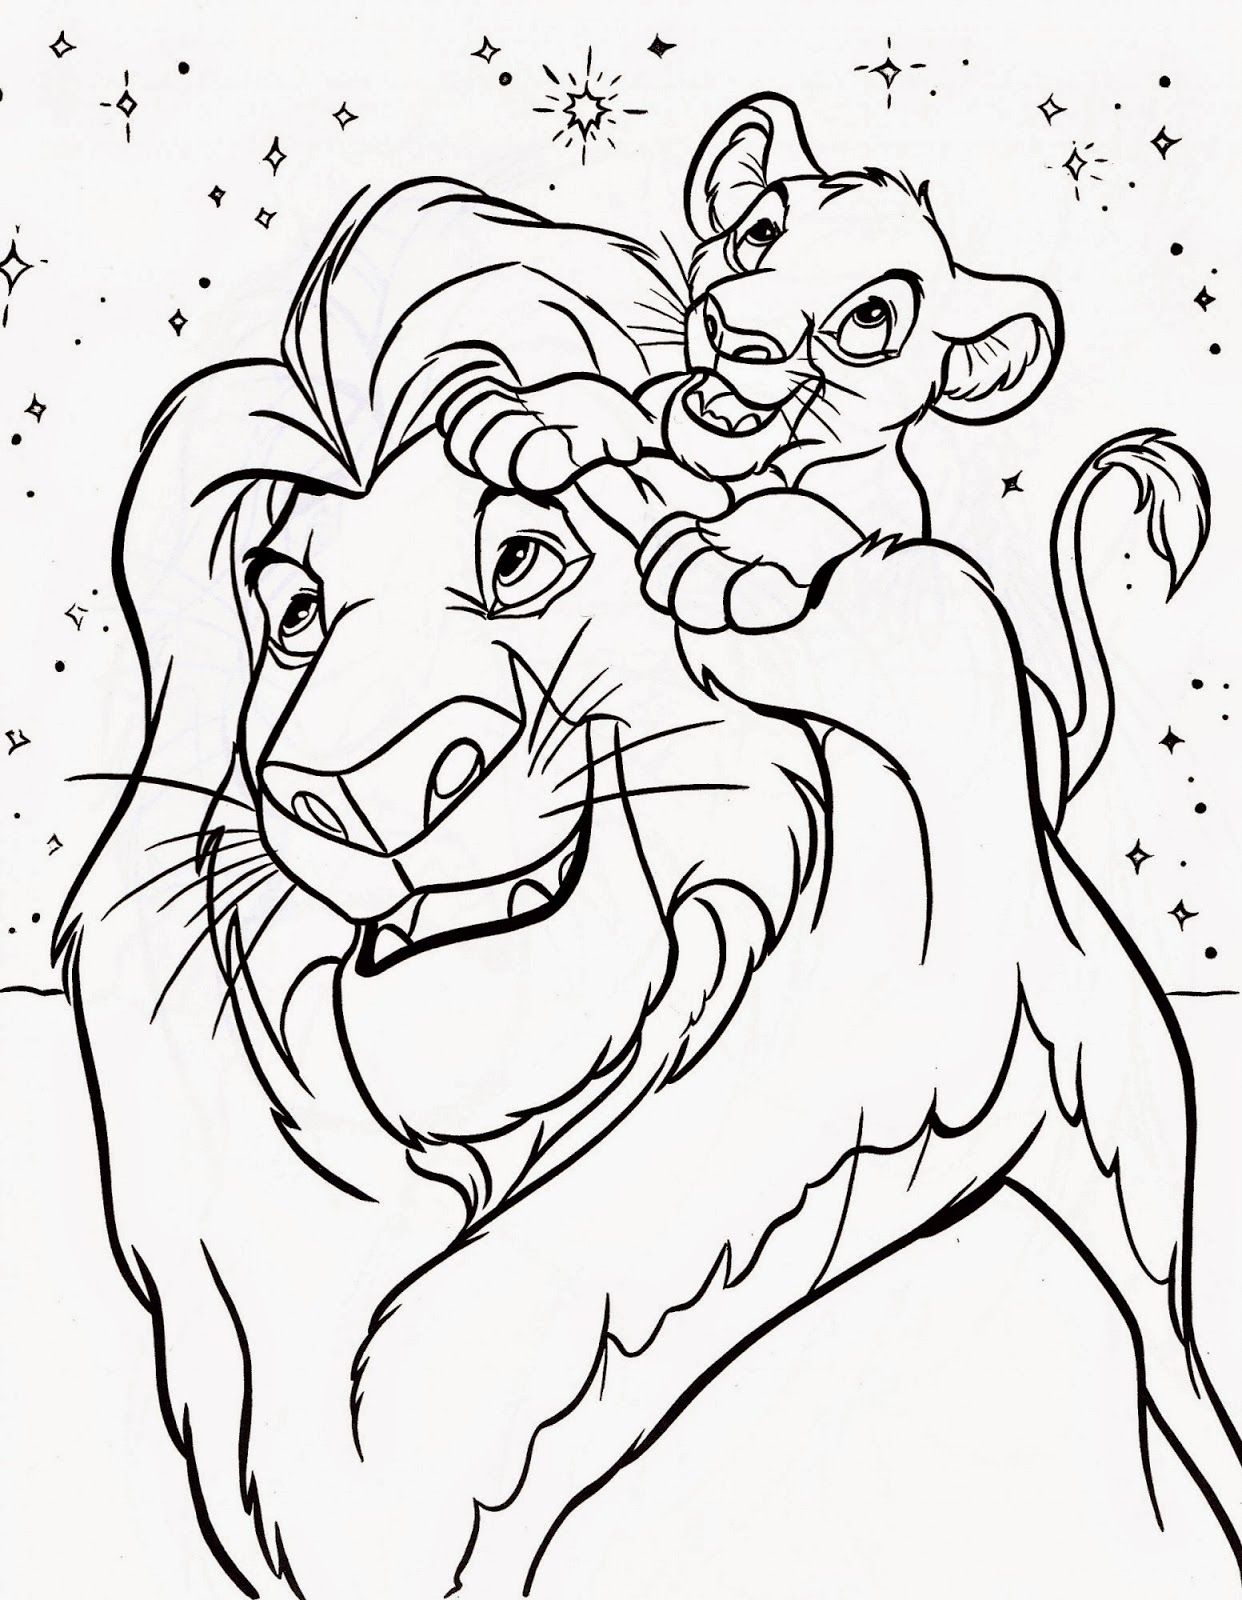 The Lion King - Coloring Pages for Kids and for Adults